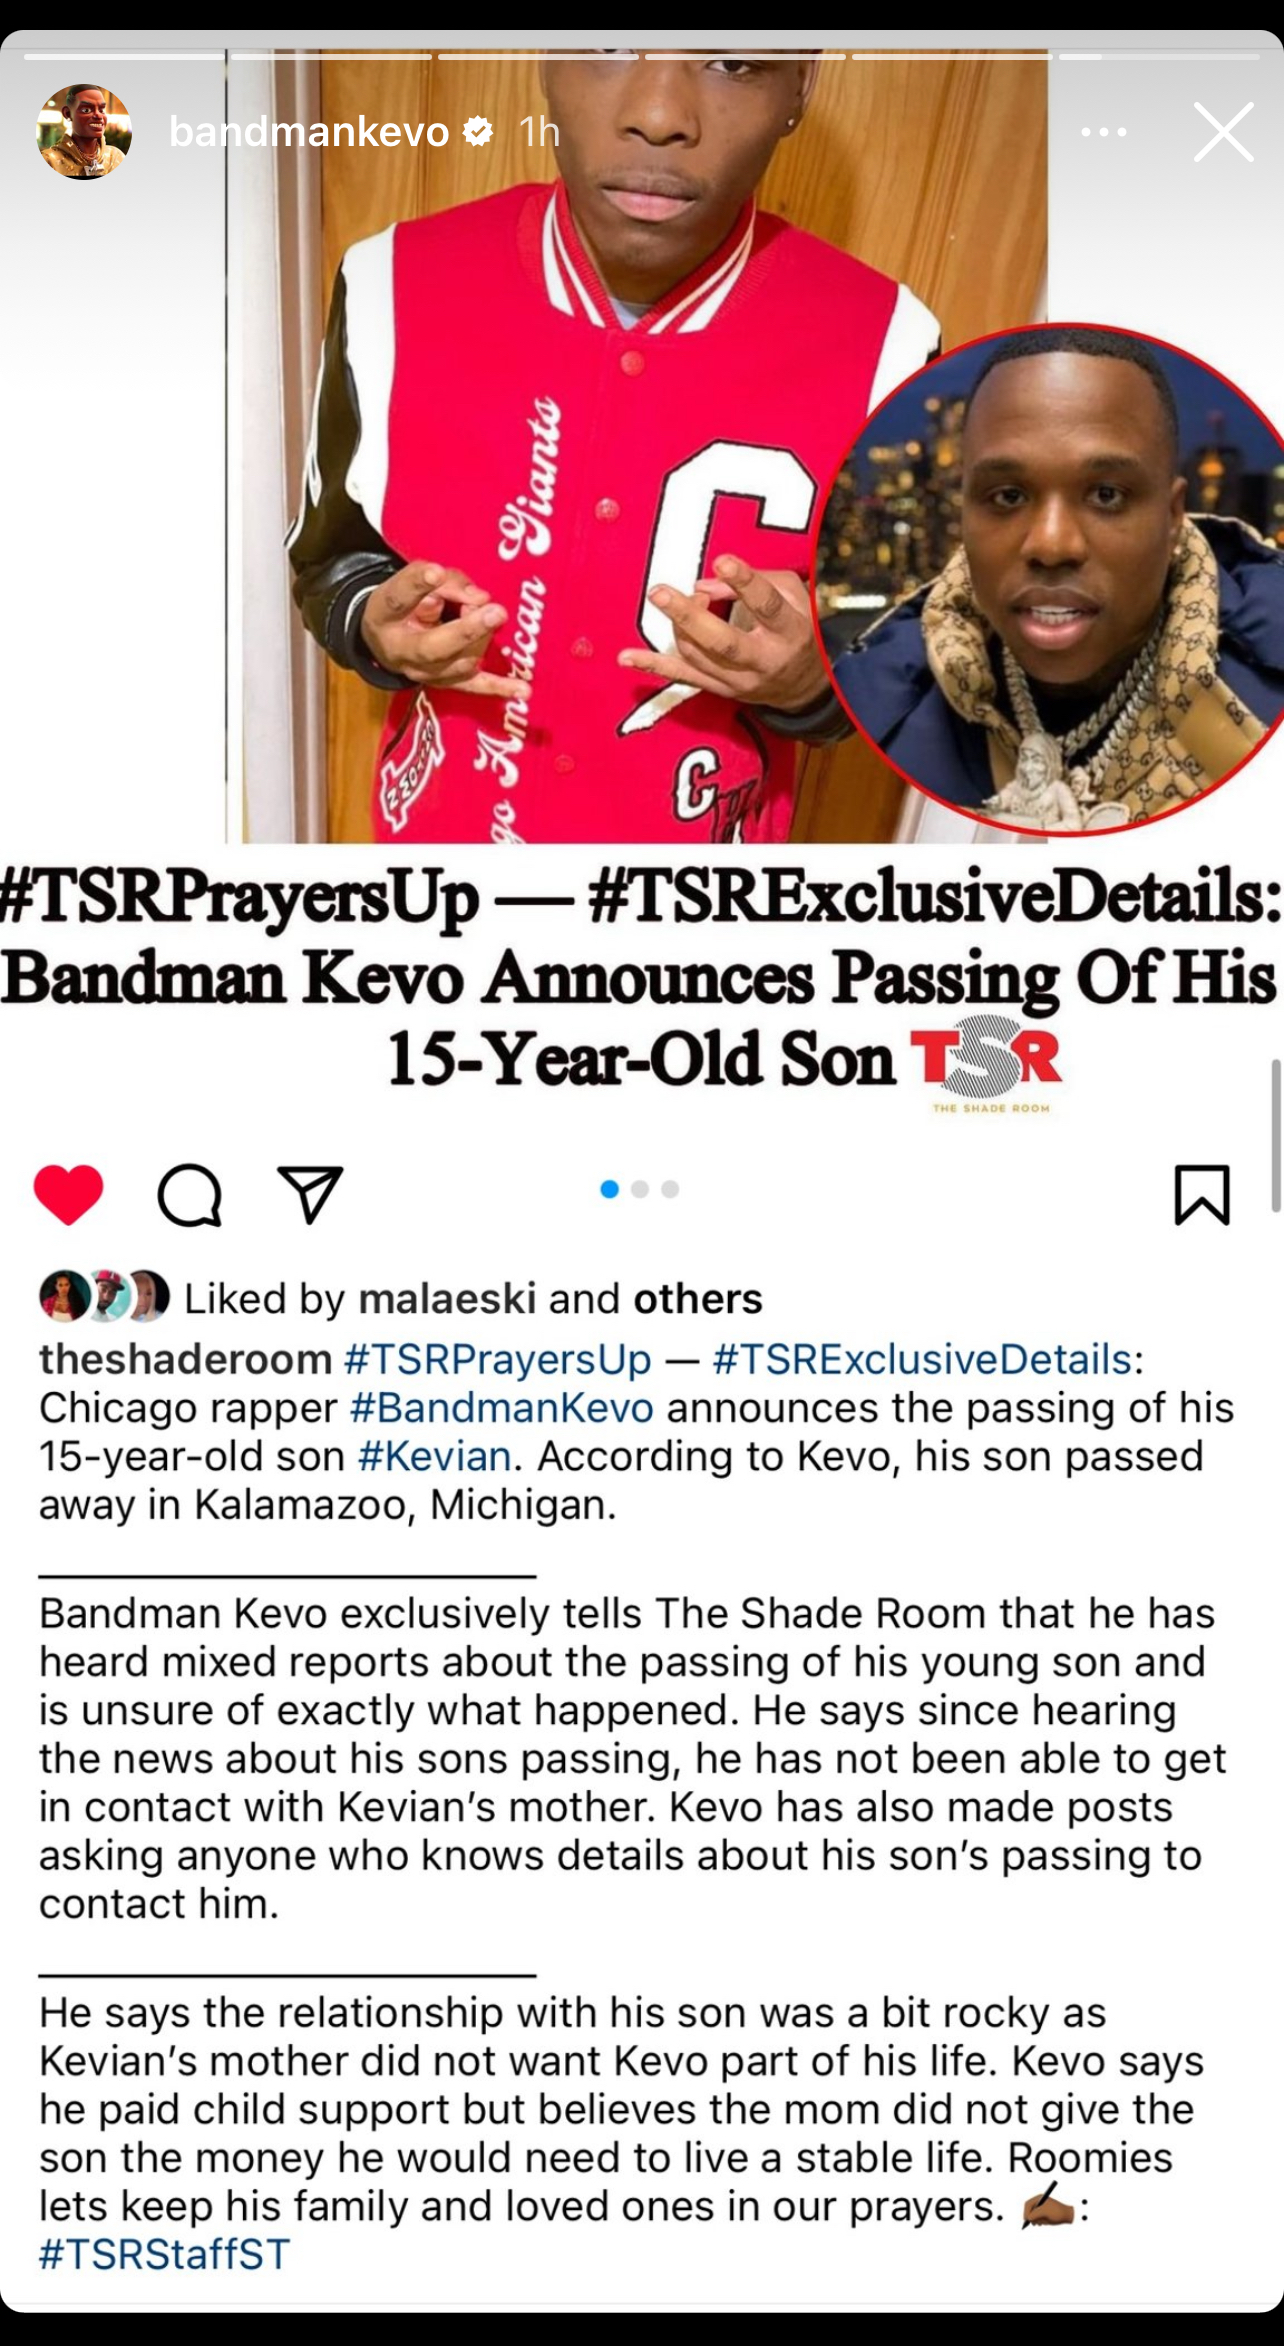 Bandman Kevo announces the passing of his 15-year-old son. Text and photos are integrated with tributes and condolences